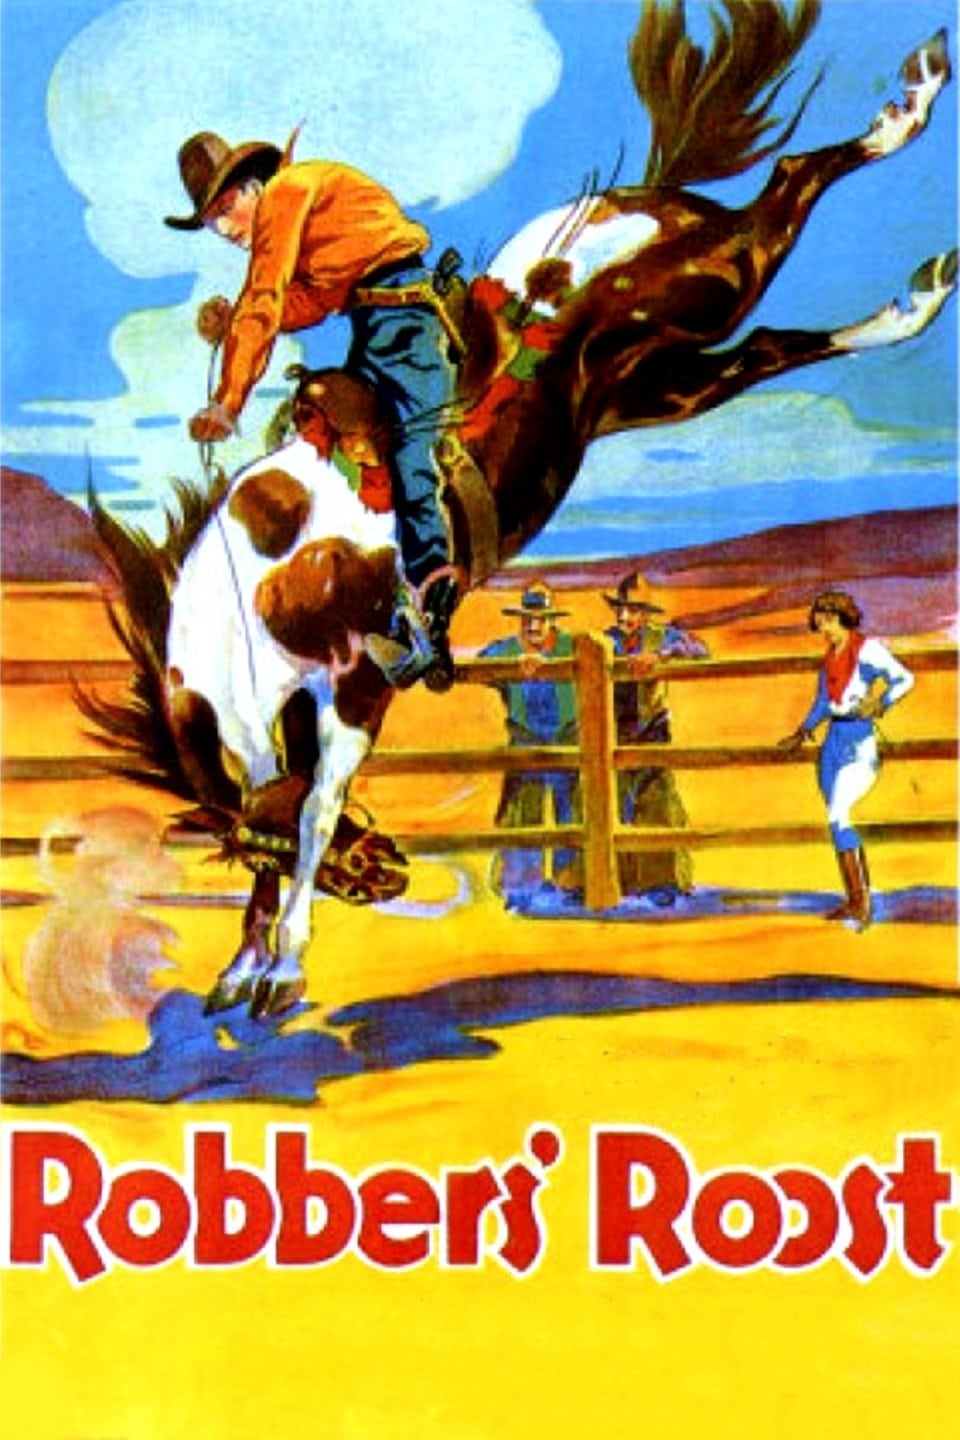 Robbers' Roost (1955)